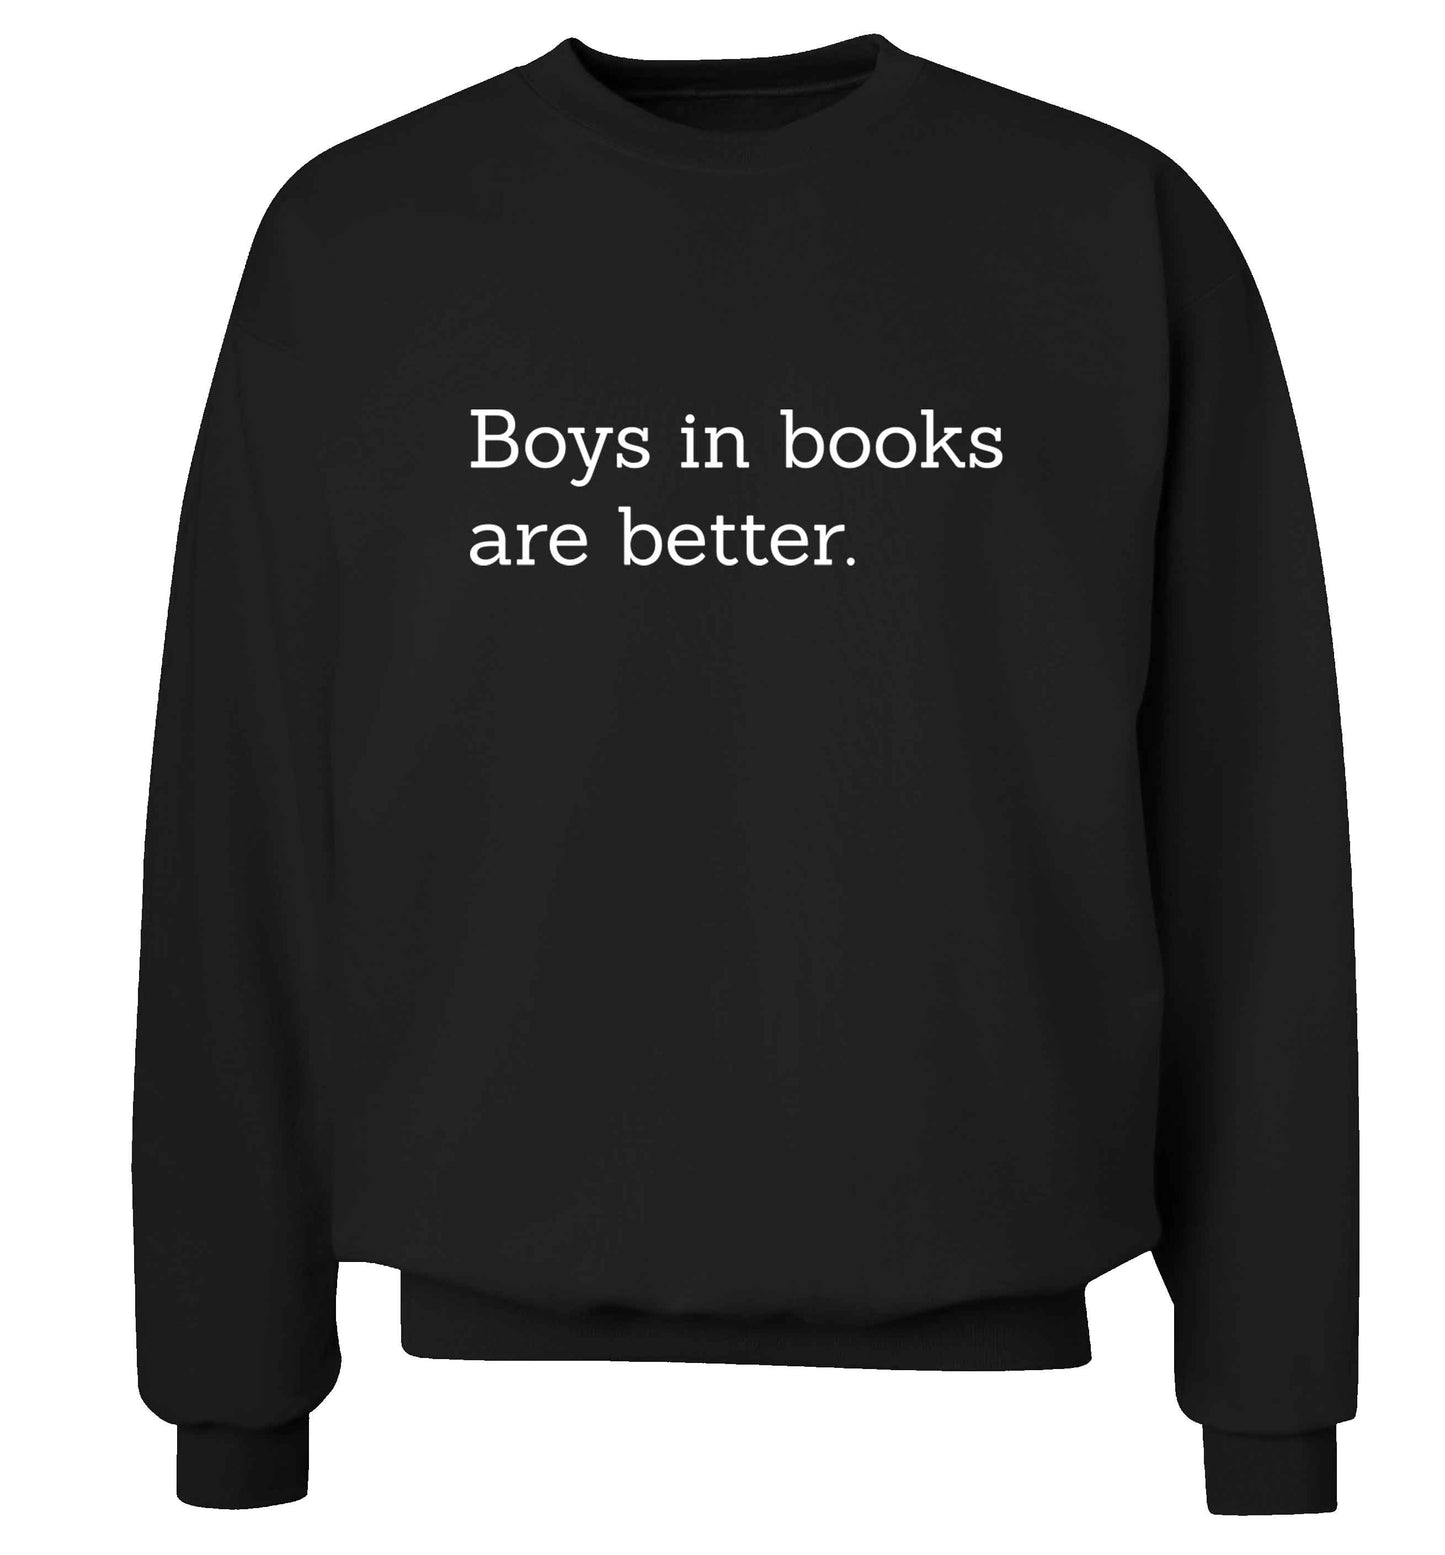 Boys in books are better adult's unisex black sweater 2XL